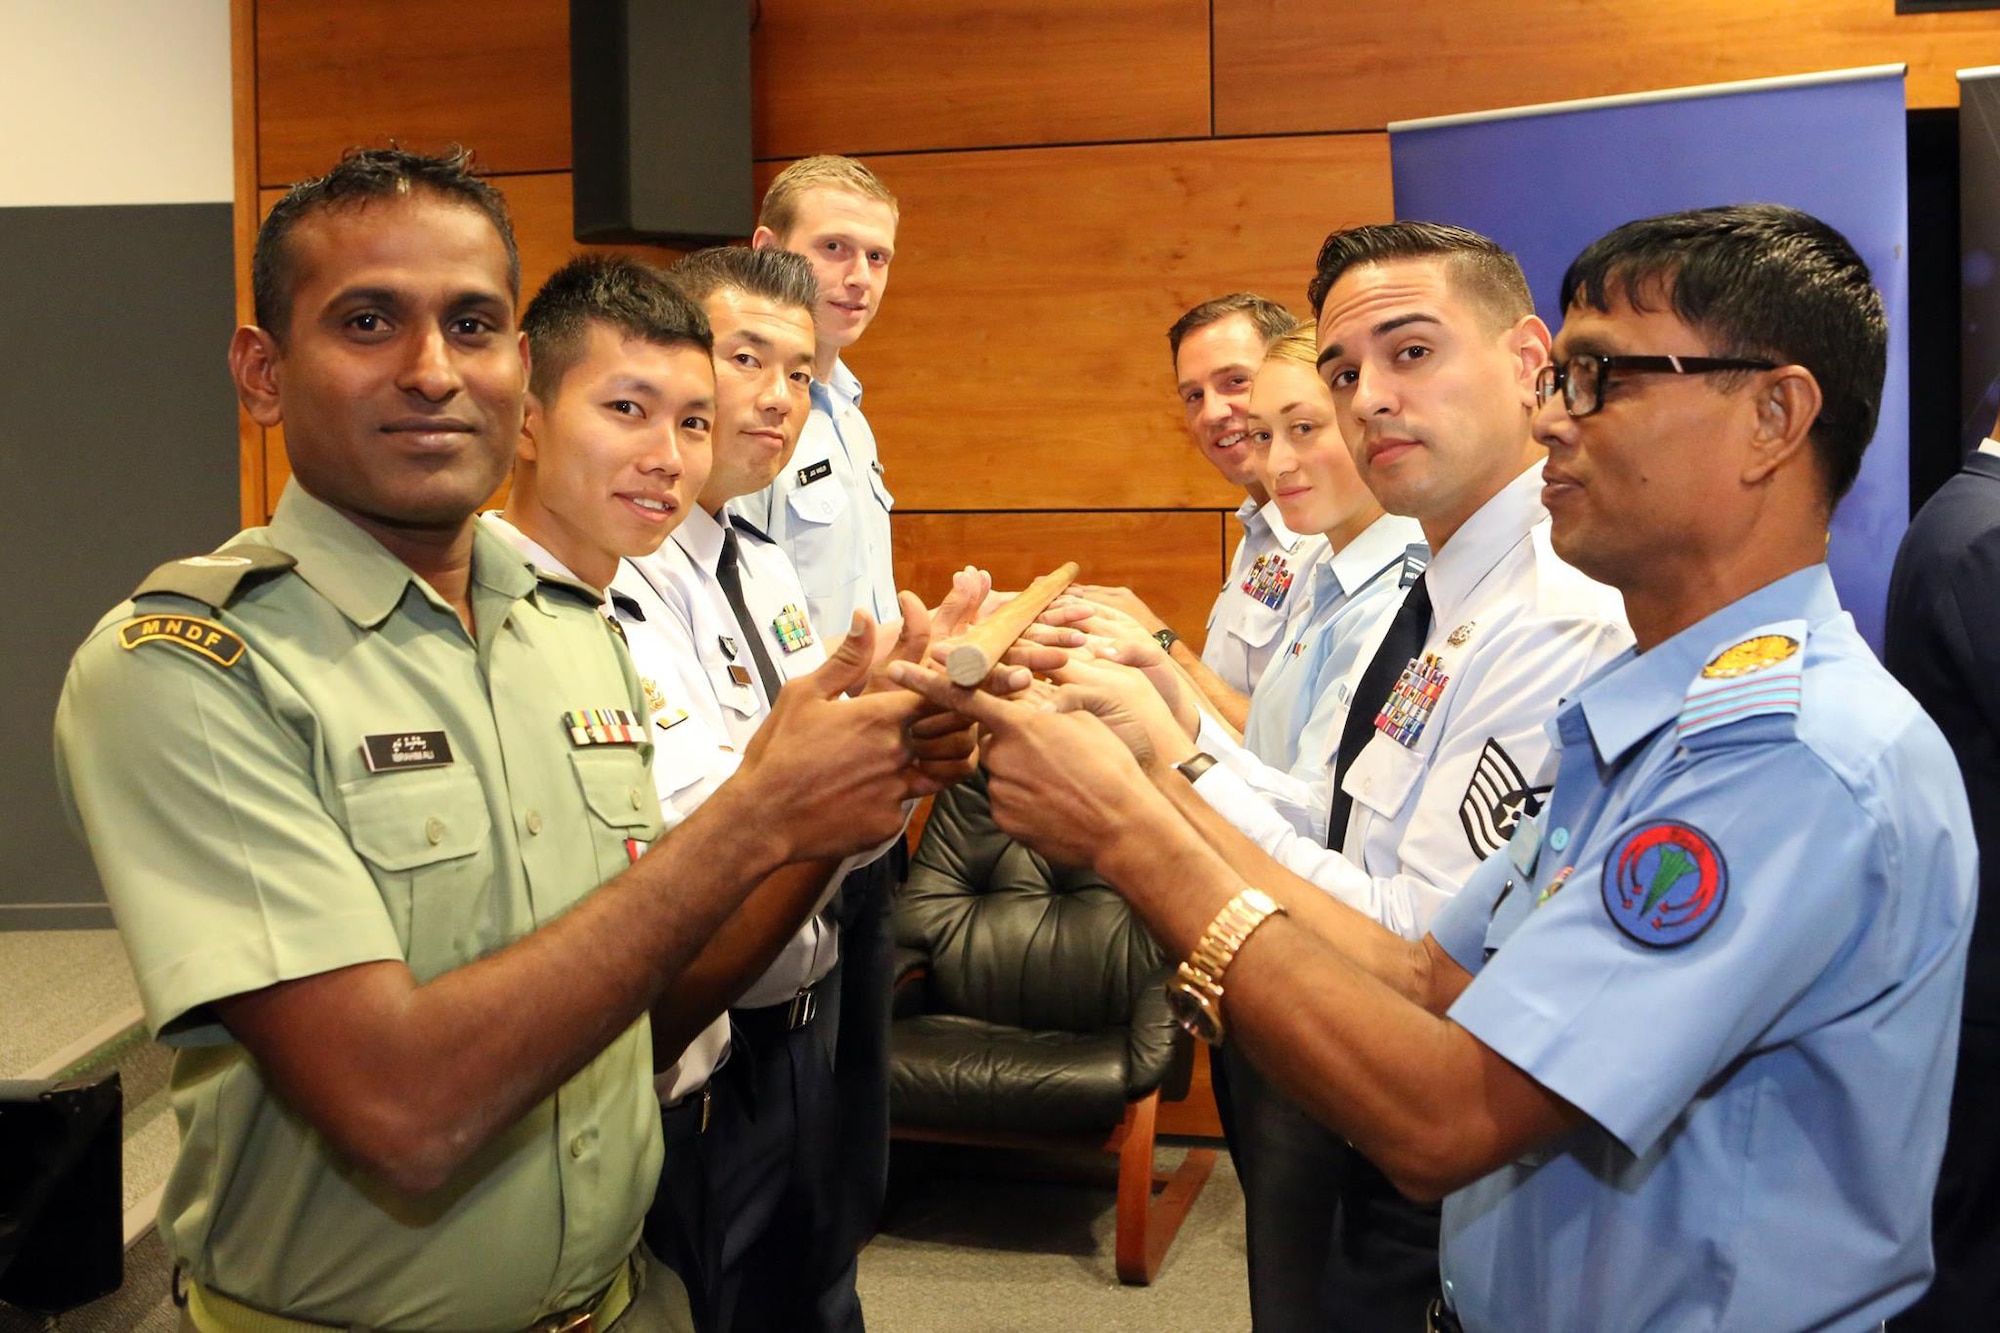 U.S. Air Force Tech. Sgt Luis Reyes (right side, second from front), 36th Wing Command Chief executive assistant, conducts a leadership challenge with Pacific Region Junior Enlisted Airmen at the first Pacific Rim Junior Enlisted Leadership Forum in Canberra, Australia, Sept. 29, 2015. Reyes joined Airmen from 12 countries to share experiences and learn about each other’s leadership techniques and improve leadership growth and partnerships in the forum.  (Courtesy photo)